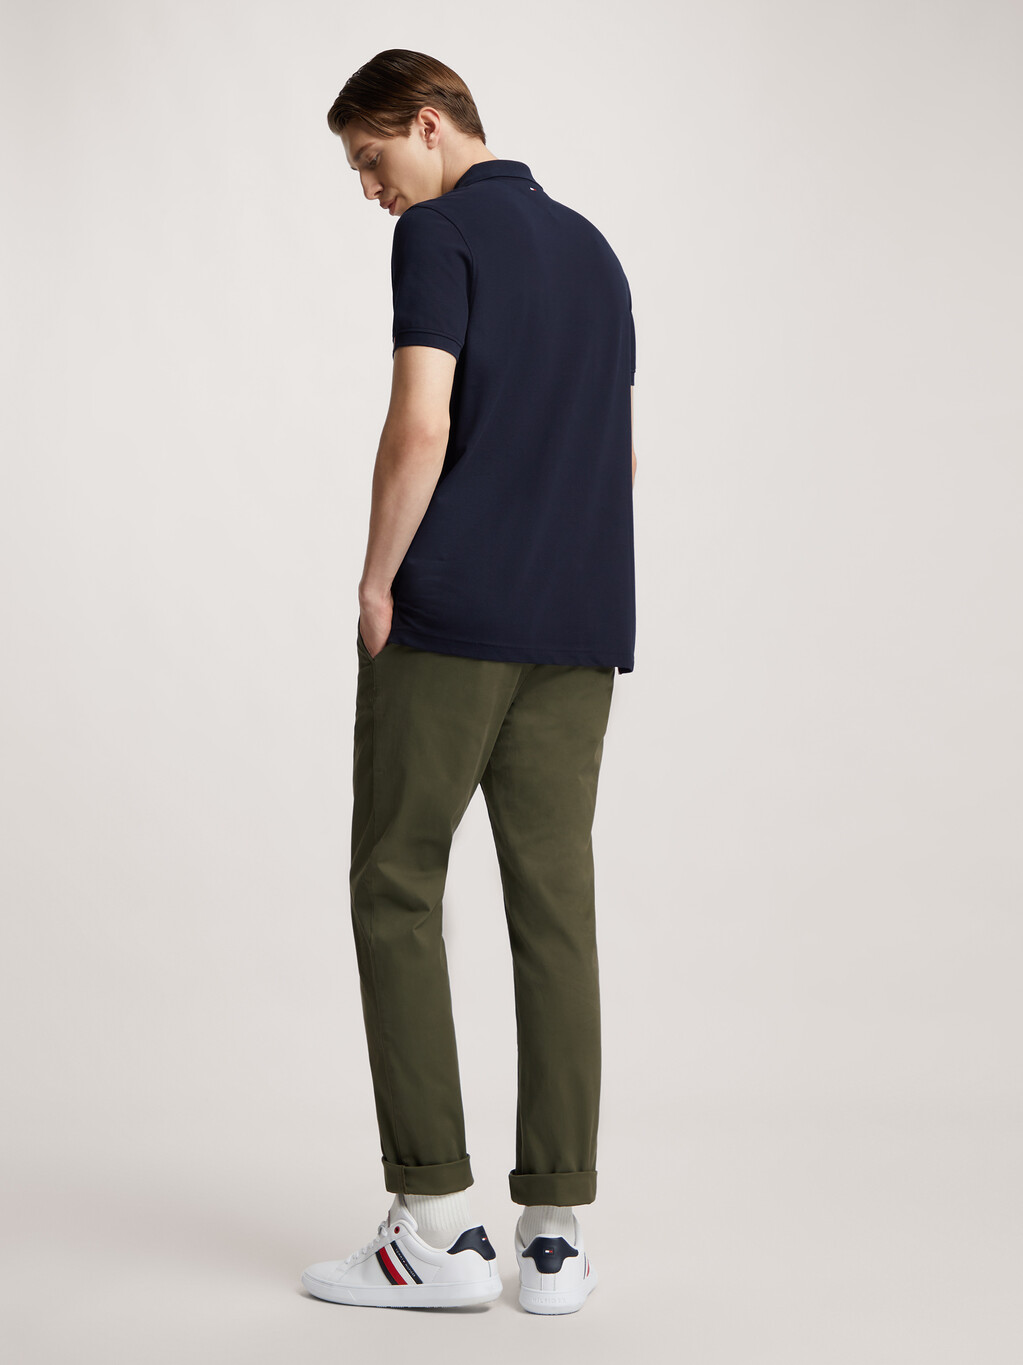 1985 Collection Denton Fitted Chinos, Army Green, hi-res